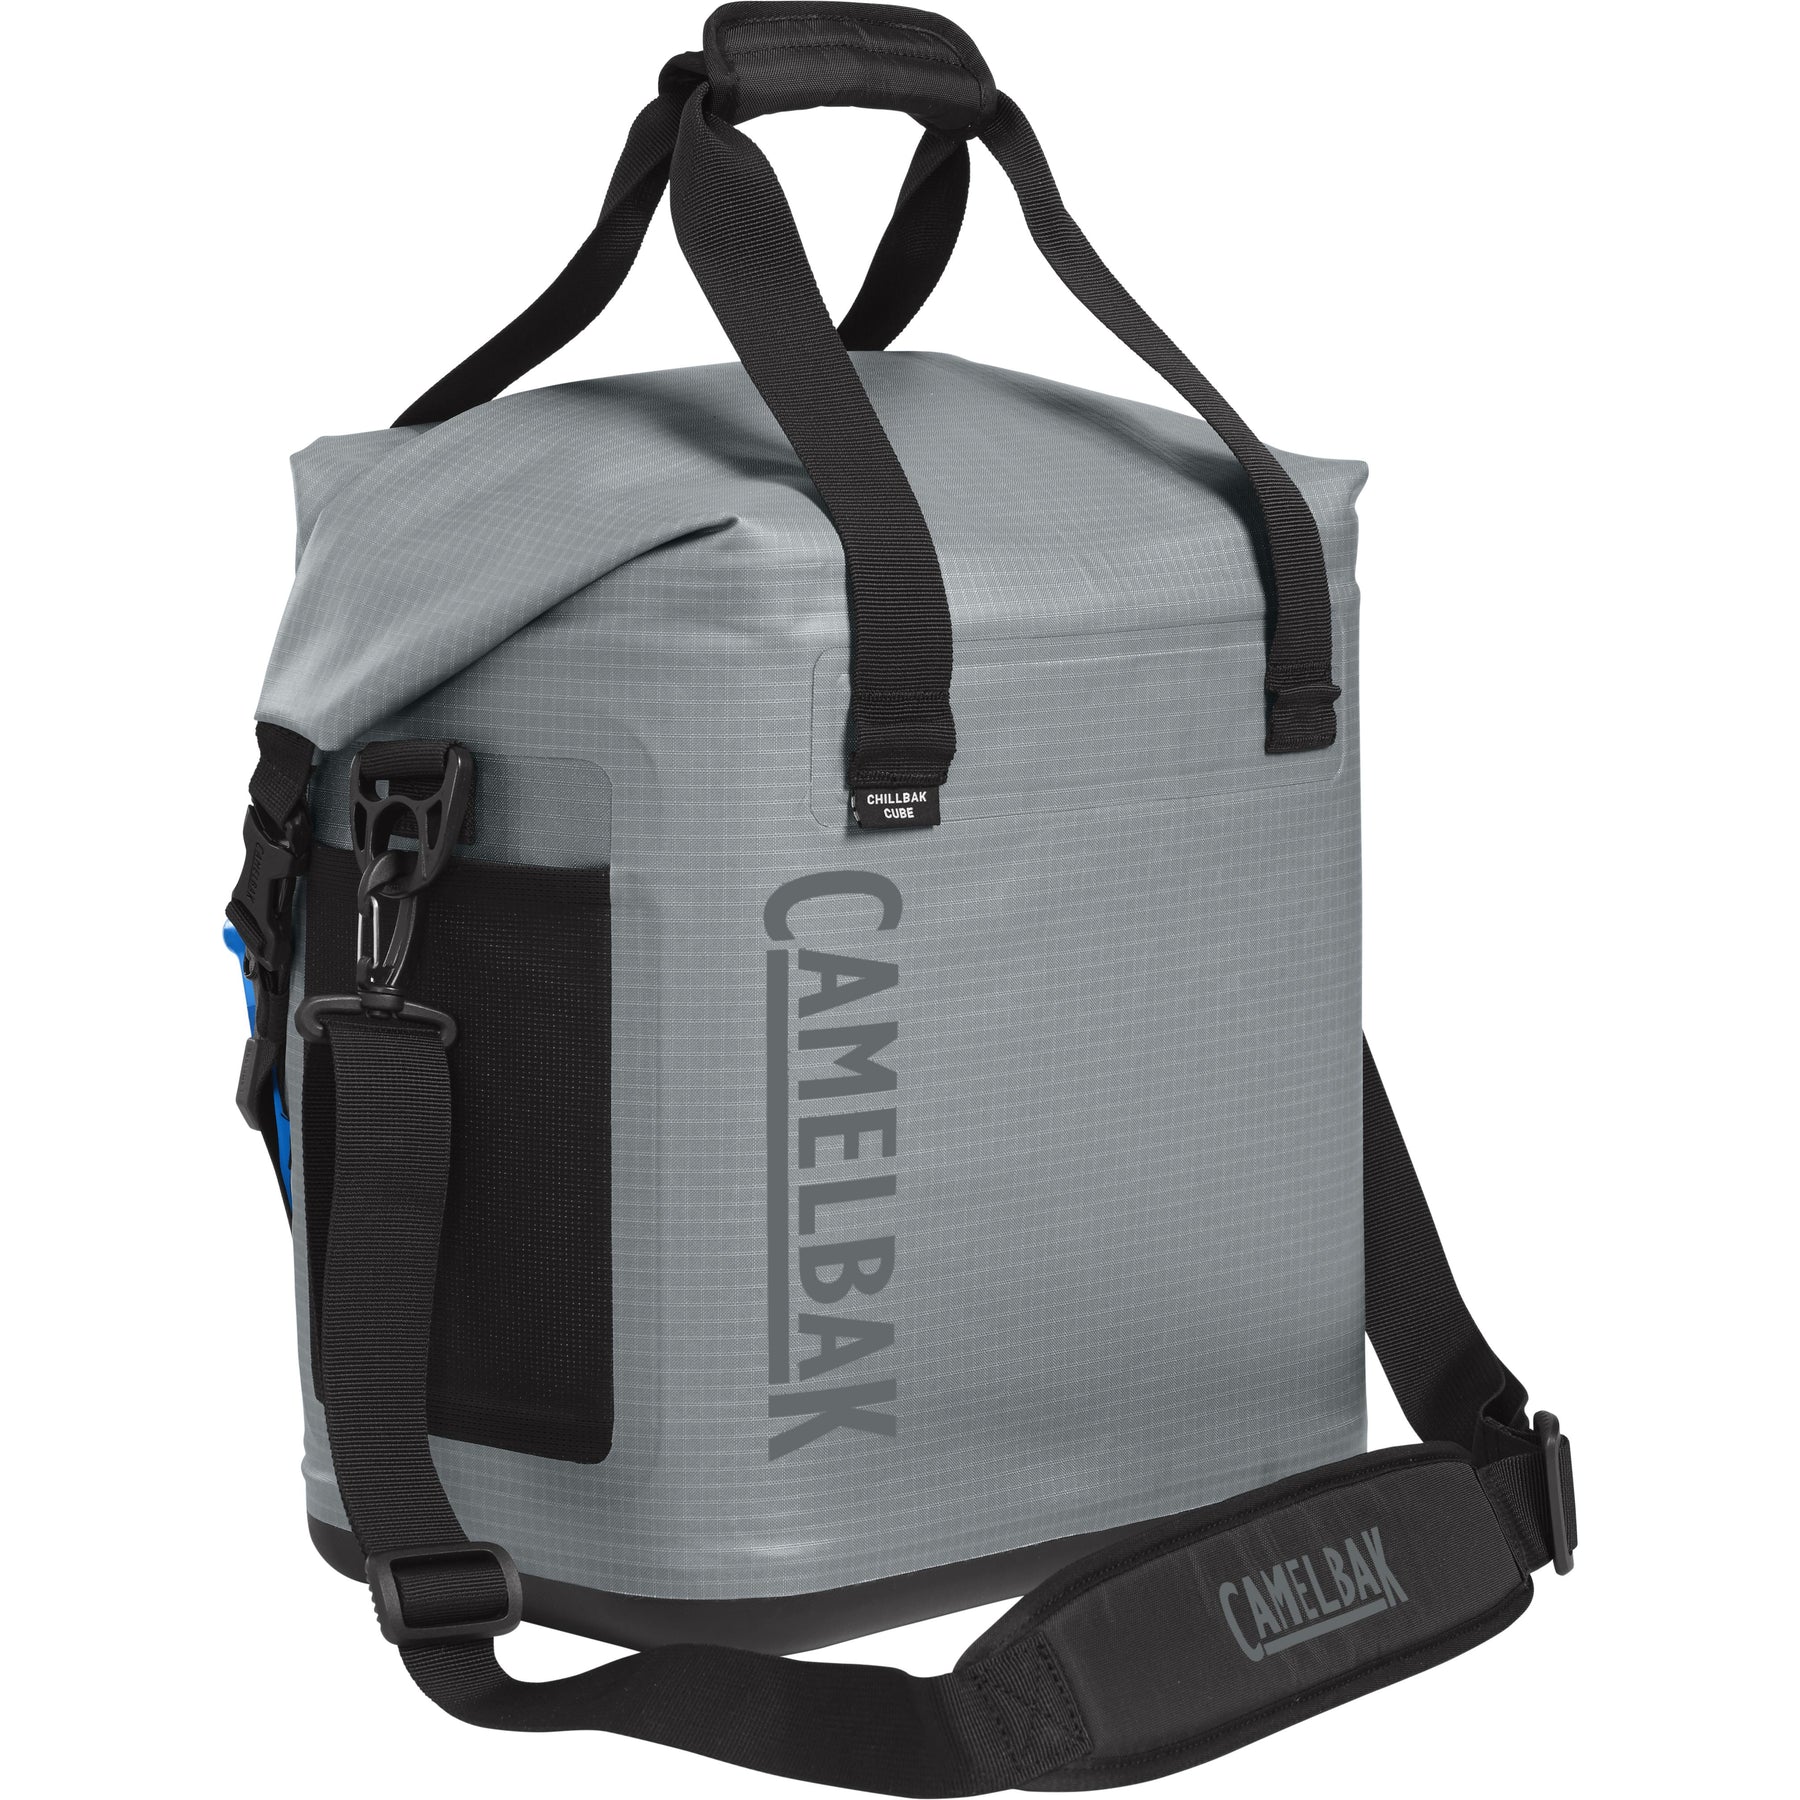 Camelbak Cube 18 Fusion 3L Group Hydration Pack